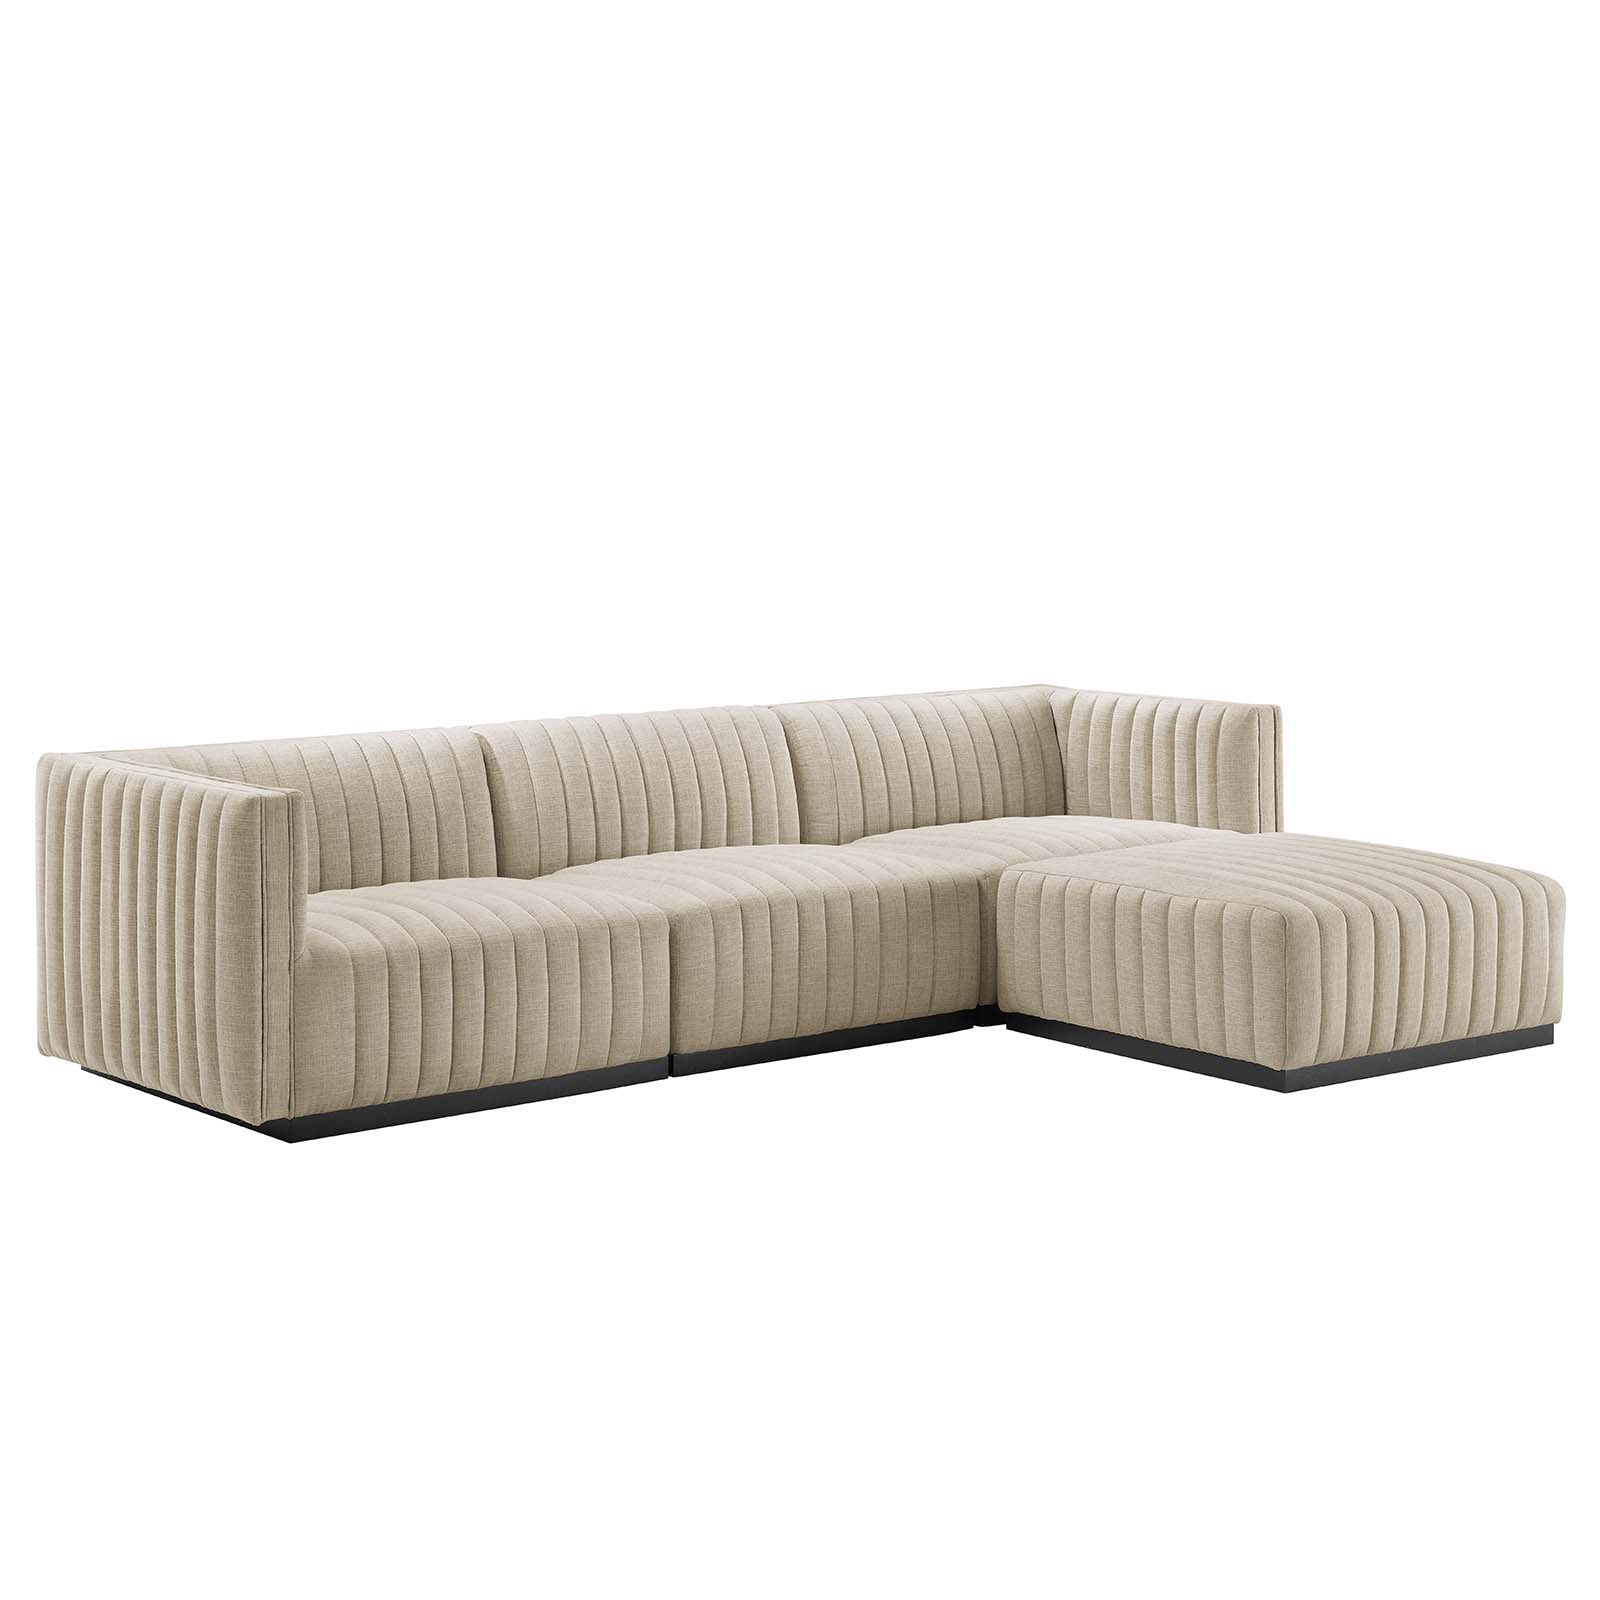 Modway Sectional Sofas - Conjure Channel Tufted Upholstered Fabric 4-Piece Sectional Sofa Black Beige